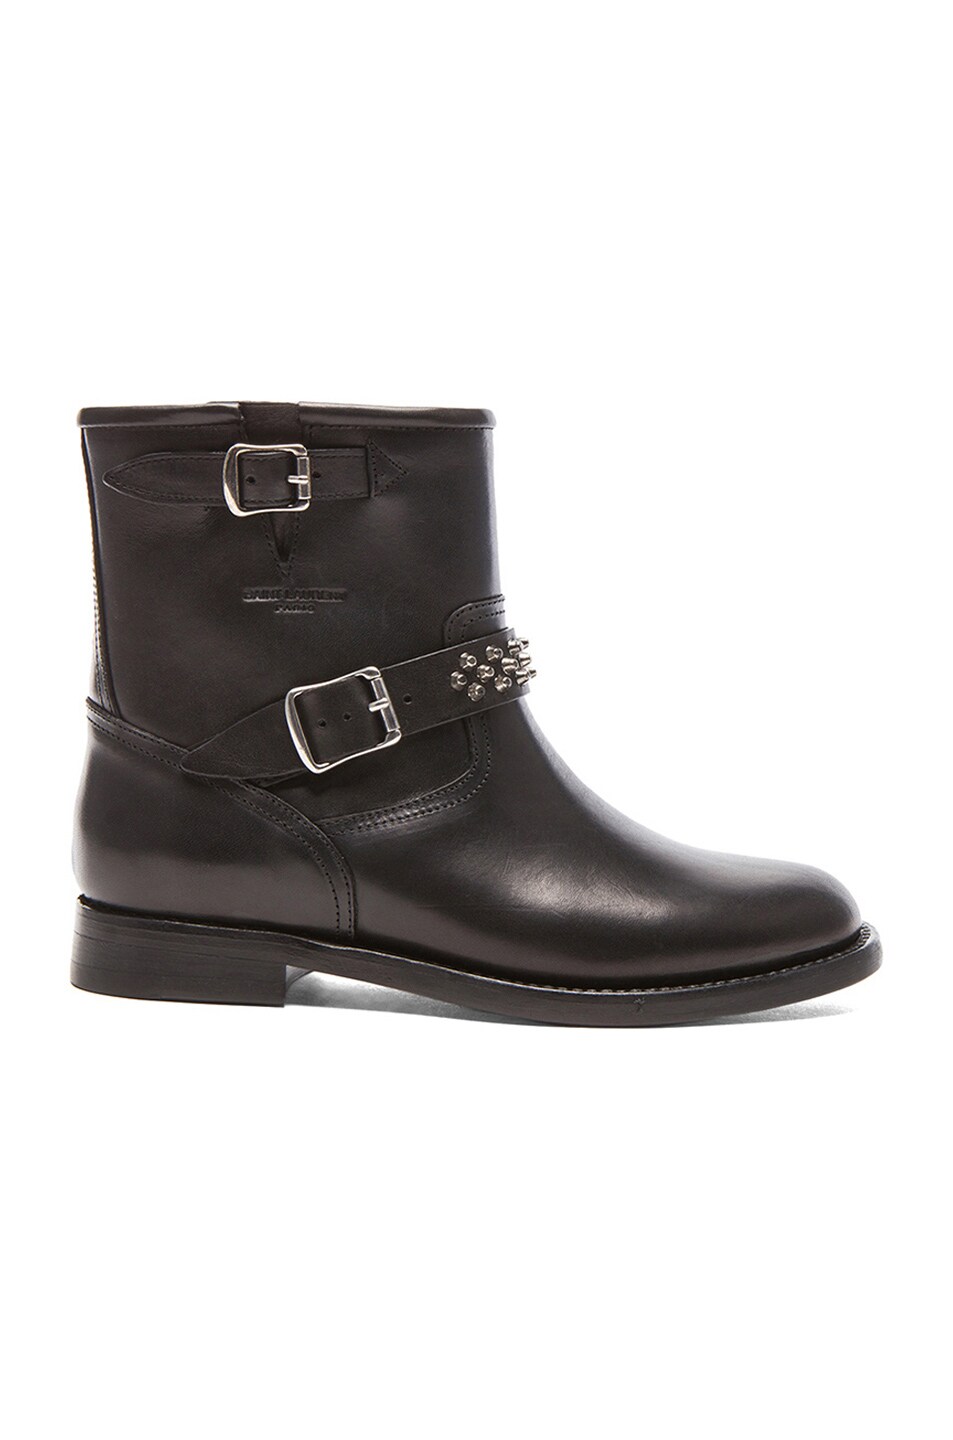 Image 1 of Saint Laurent Leather Studded Motorcycle Boots in Black